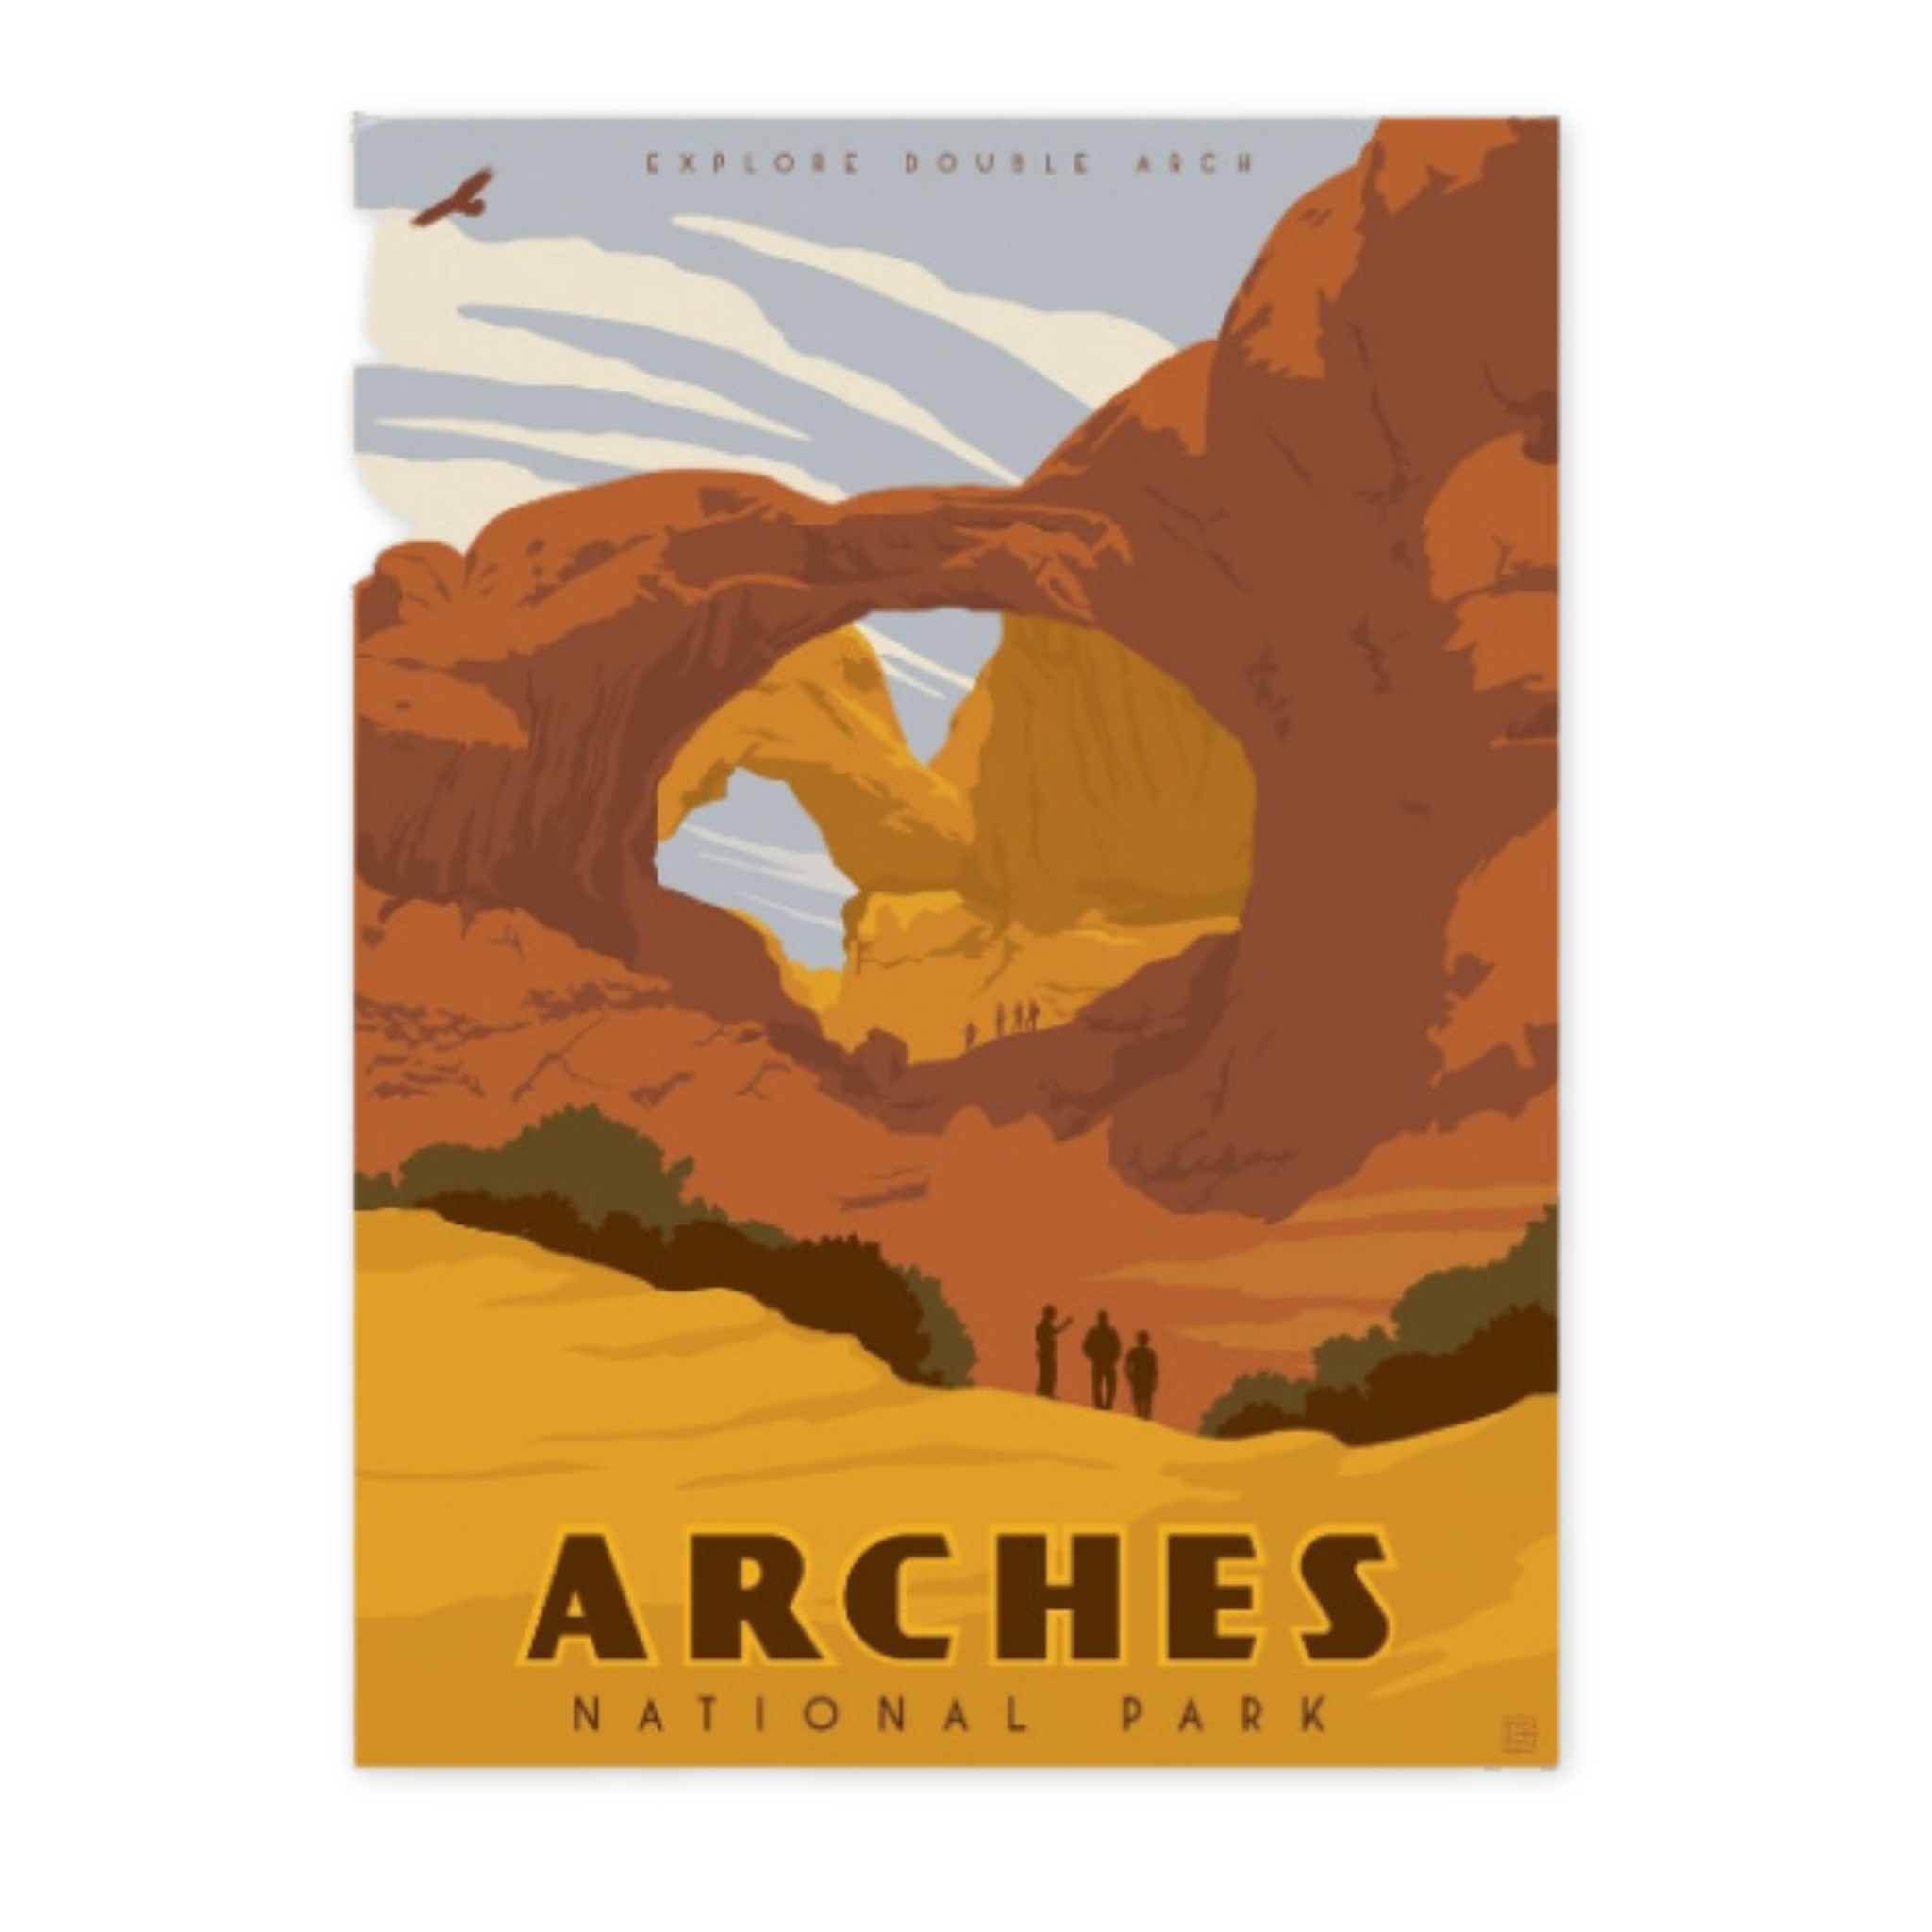 print of arches national park with an image of double arch